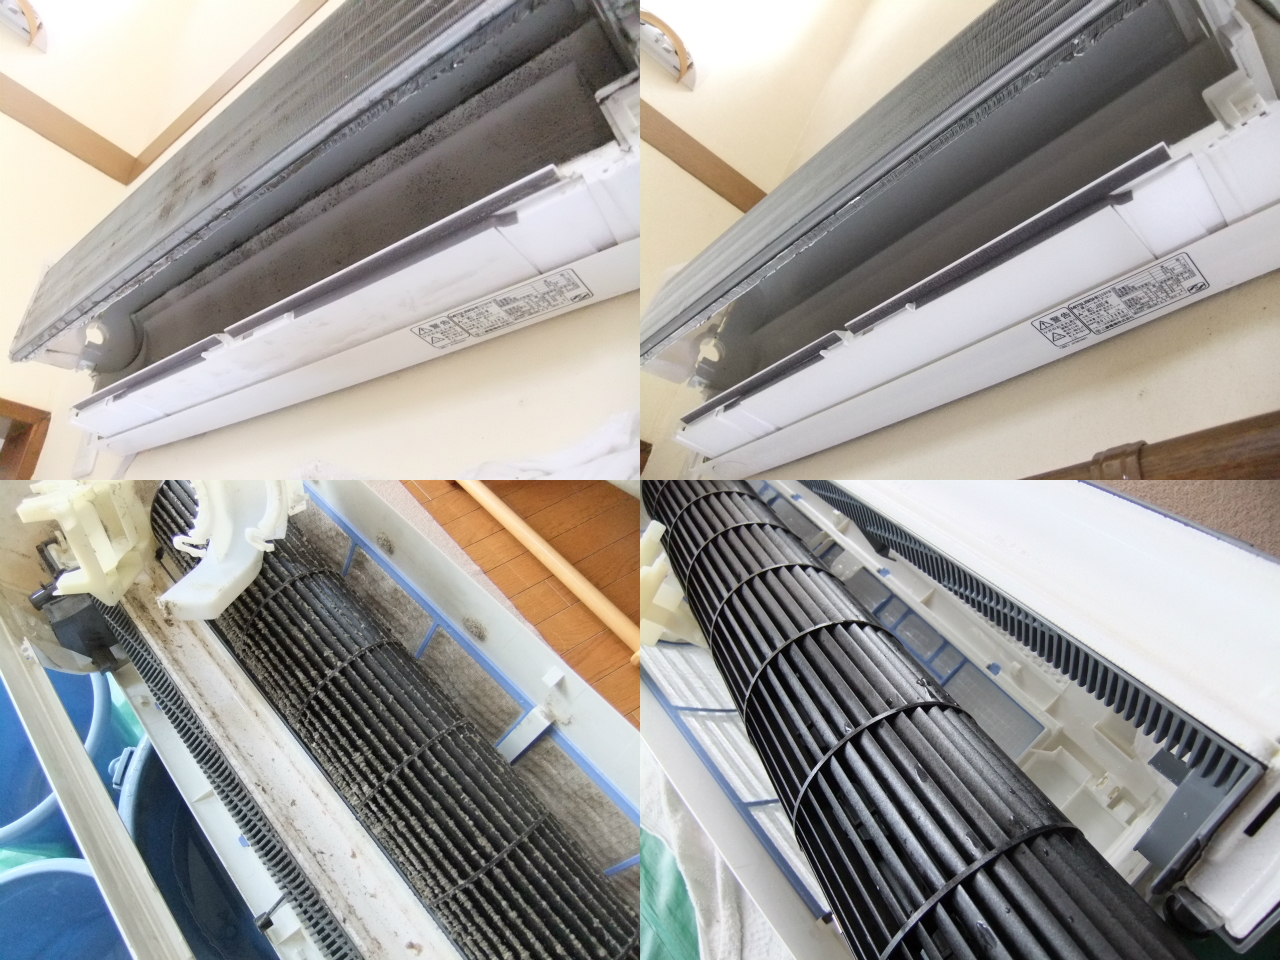 http://ajras.net/images/110805-aircon3.jpg